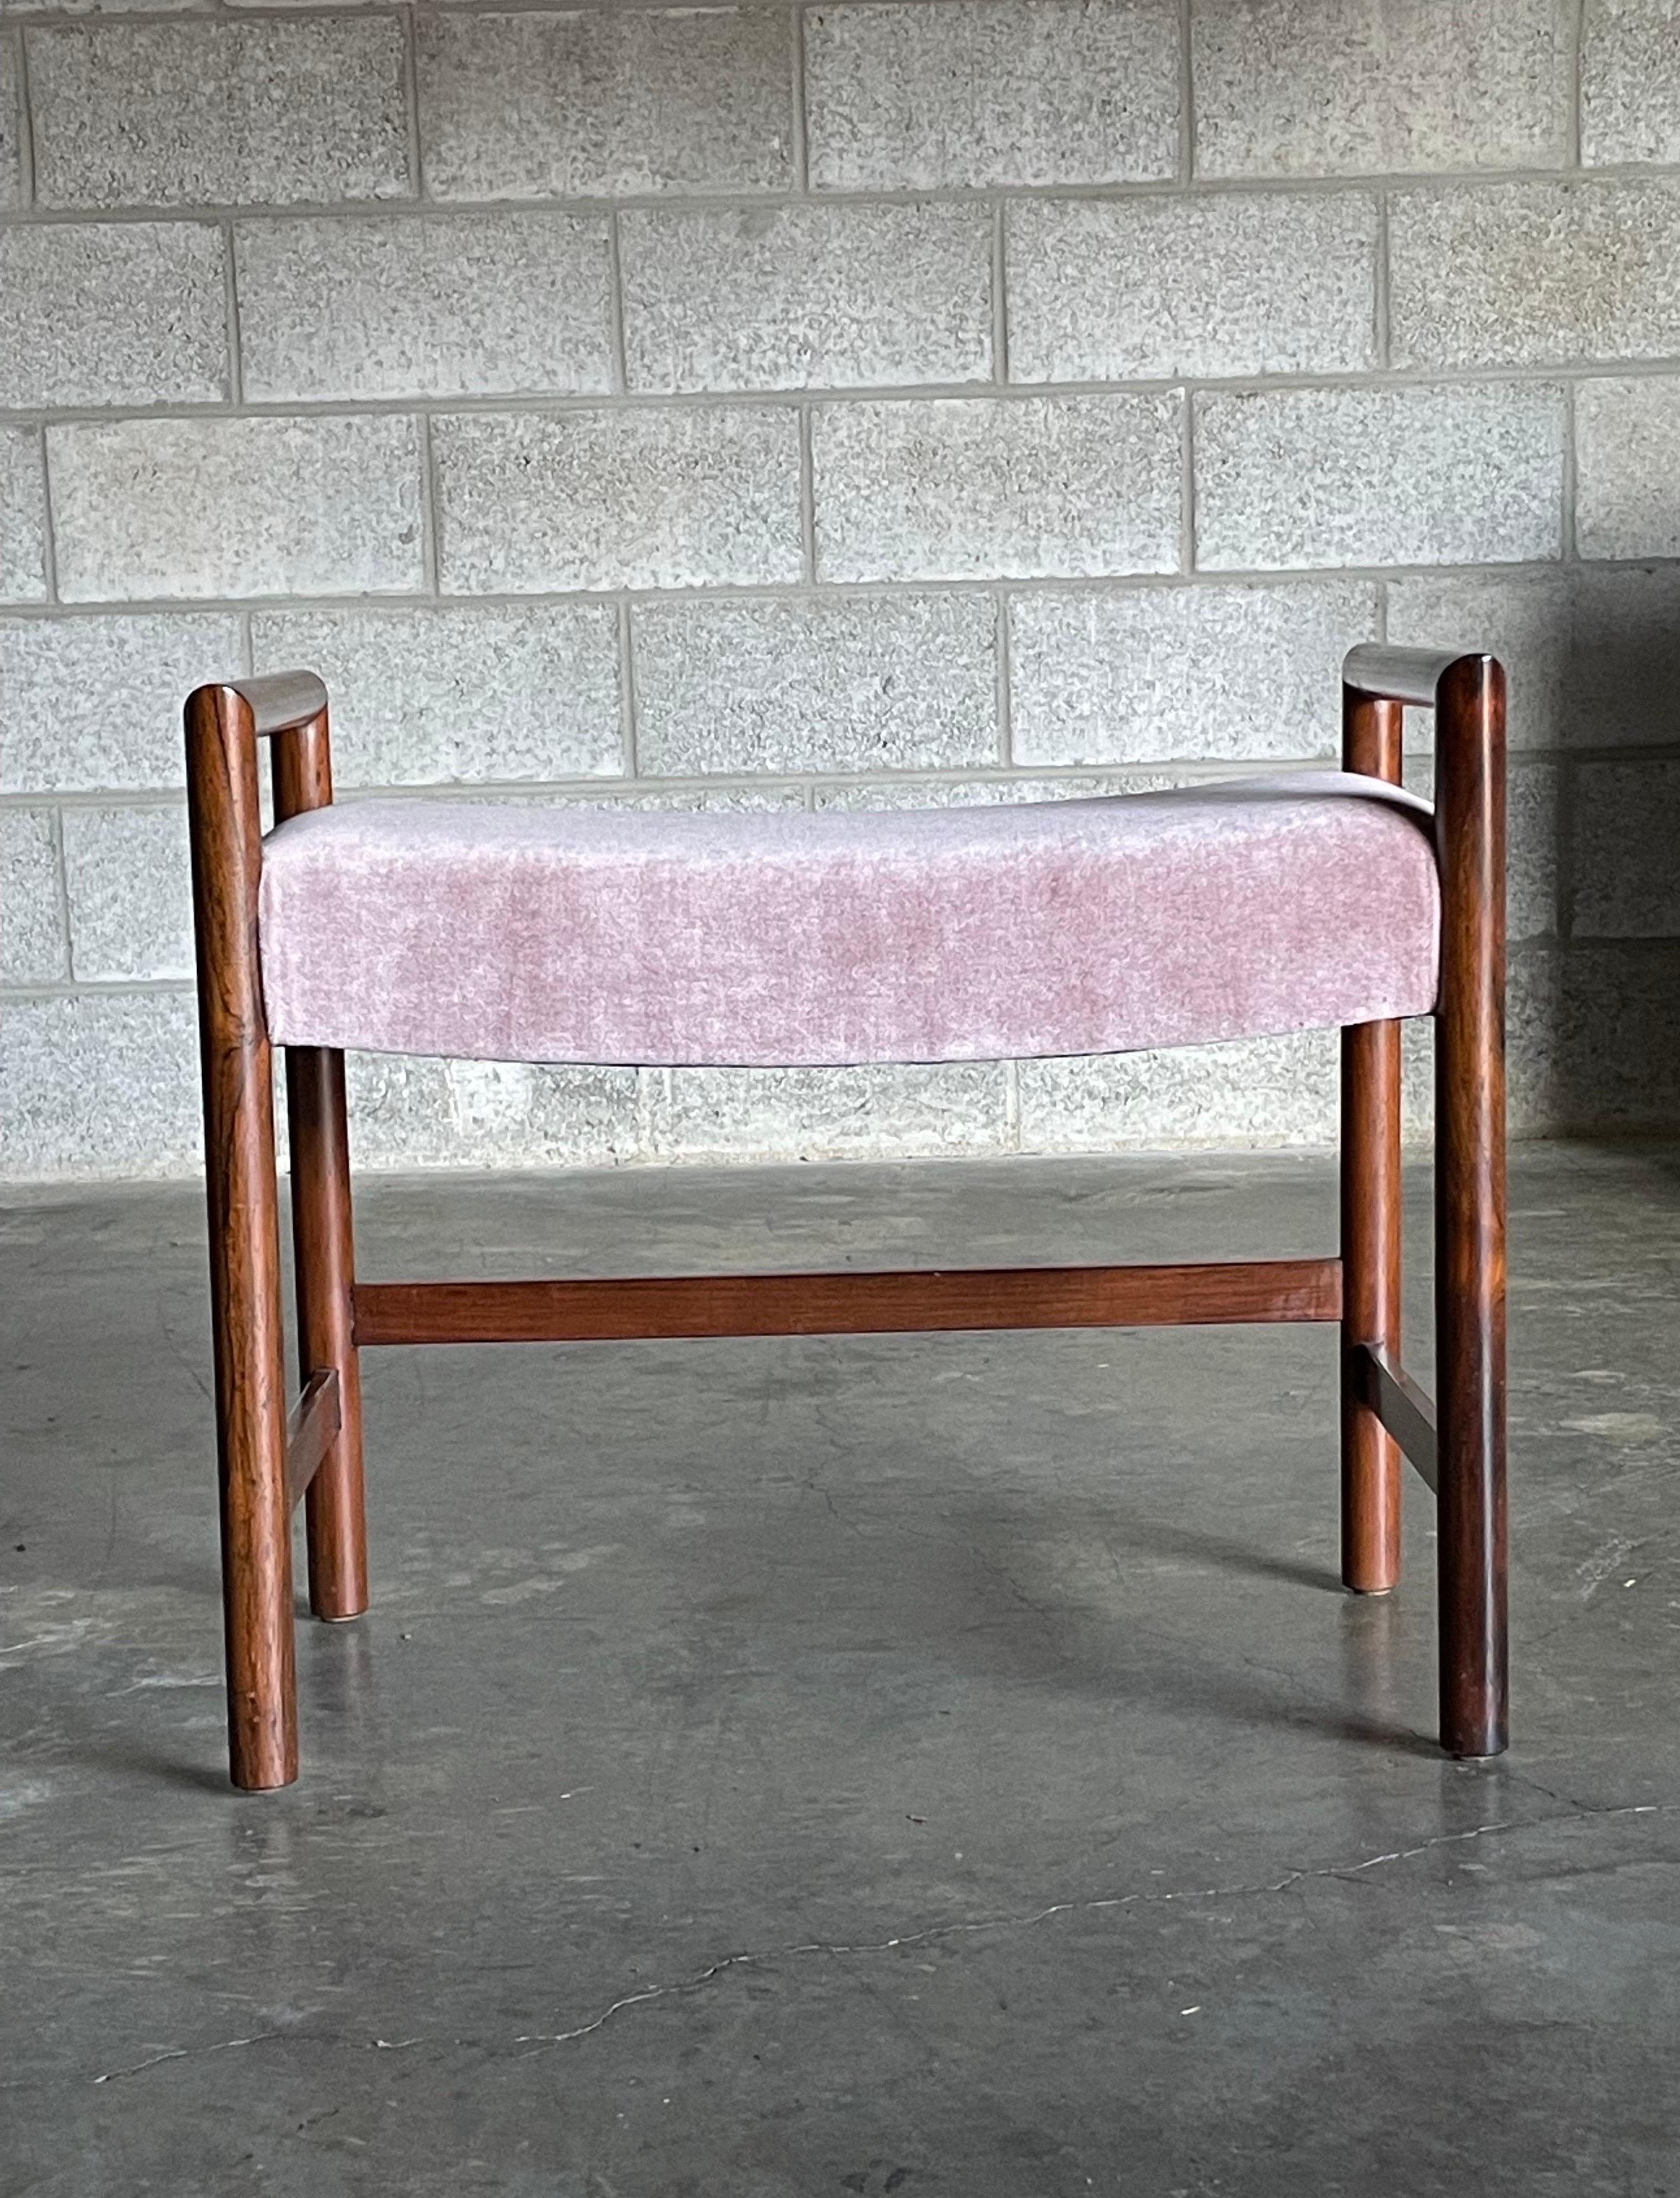 An elegant vanity bench designed by Edward Wormley for Dunbar. Executed in a rosewood frame with new blush/ pink mohair upholstery. Very practical piece of furniture.

Other notable designers from the period include Harvey Probber, Tommi